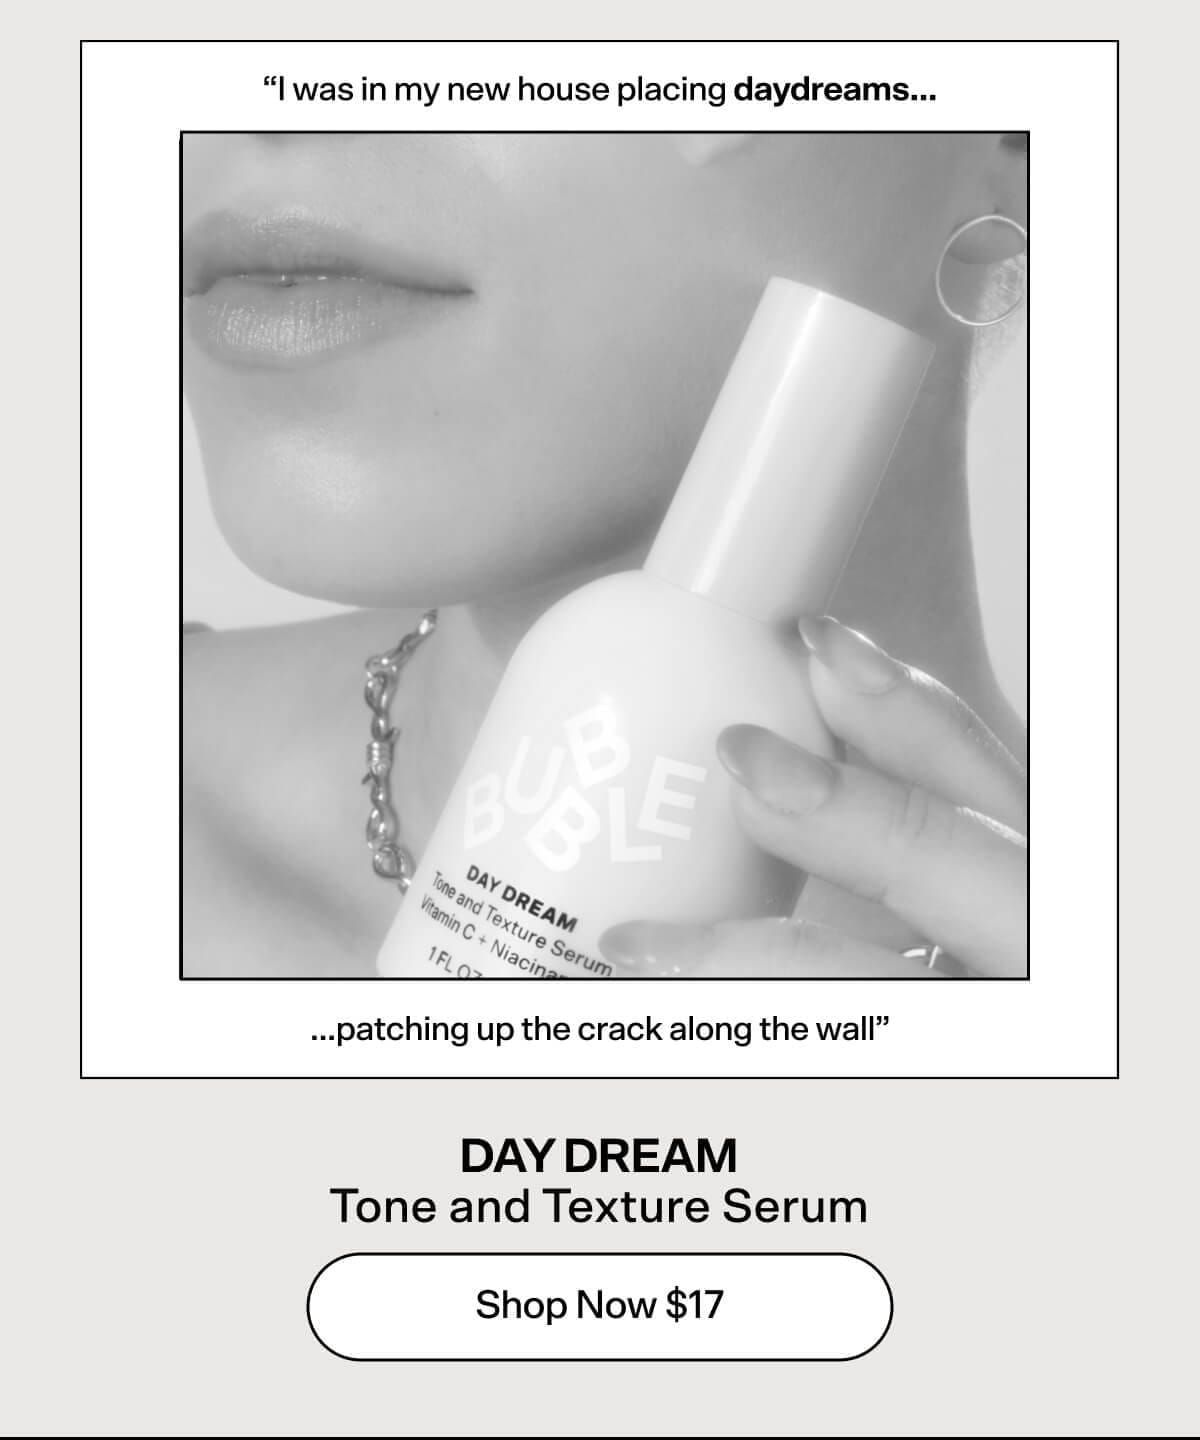 "I was in my new house placing daydreams...patching up the crack along the wall" DAY DREAM Tone and Texture Serum [Shop Now \\$17]